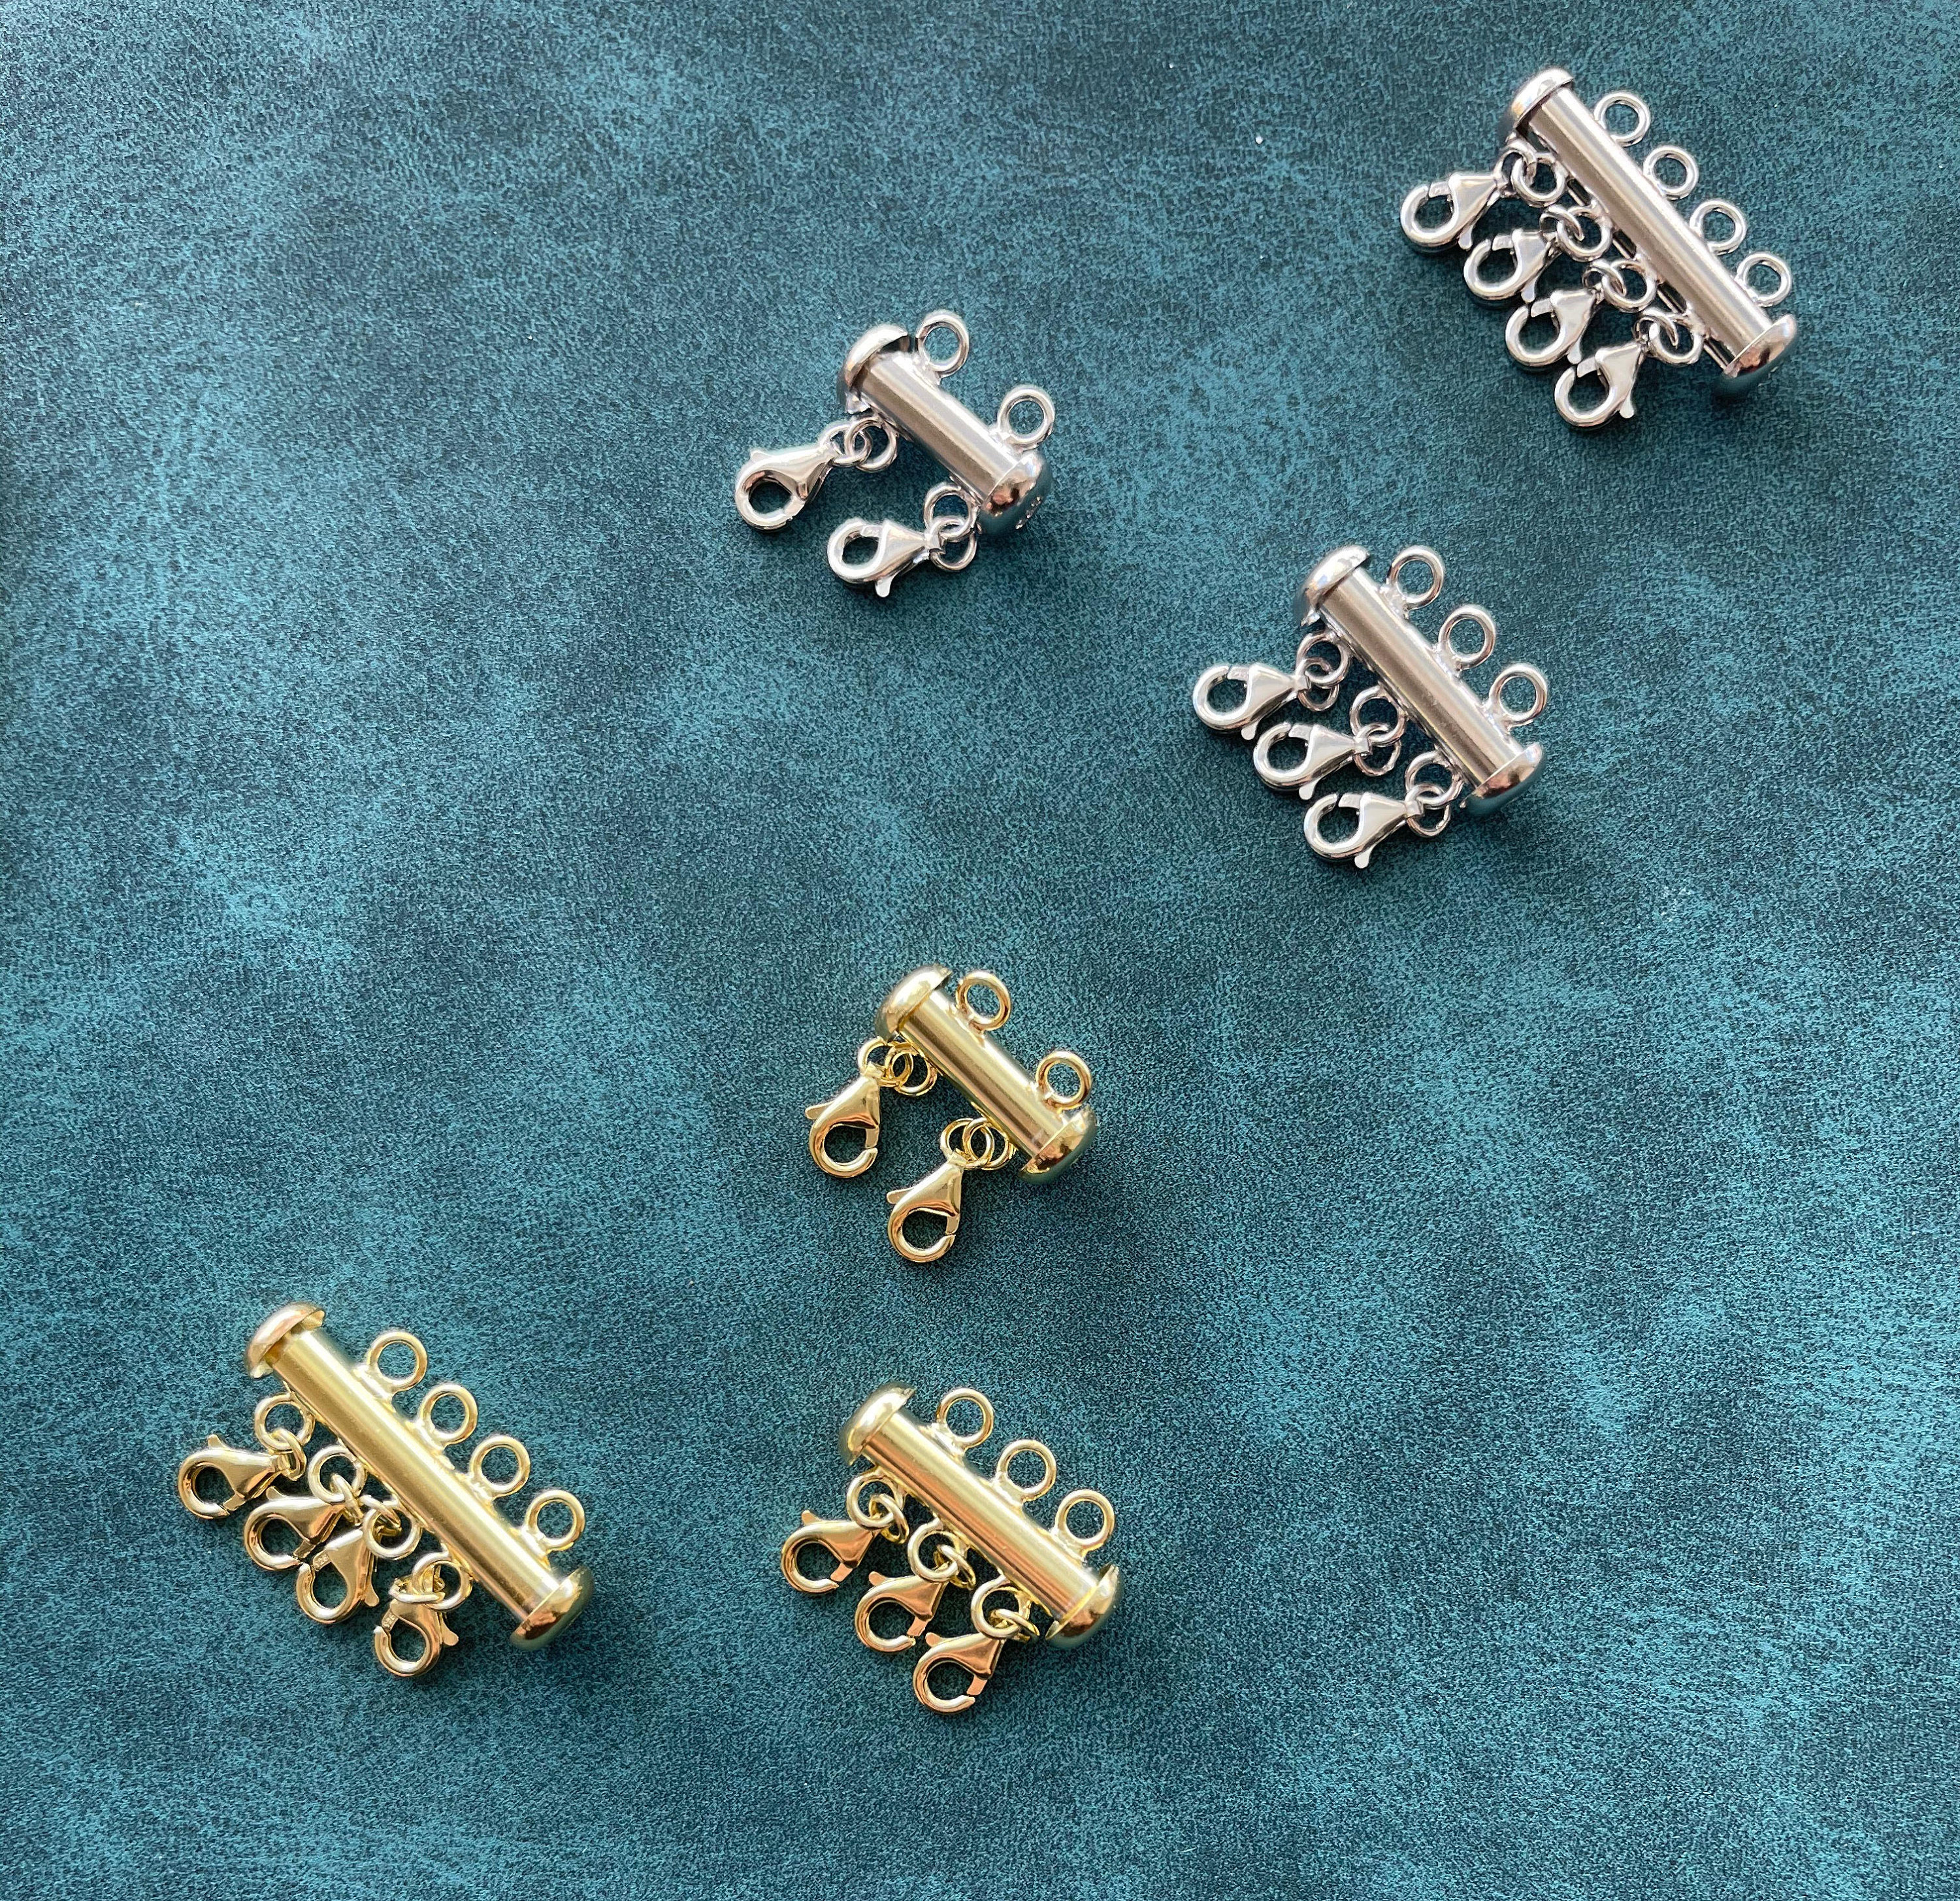  TEHAUX 6 Pcs Clasp for Multiple Necklaces Necklace Clasps for  Layered Look Multi Necklace Connectors Replacement Necklace DIY Layered  Clasps for Necklace Decor Buckle Fish Hook Metal